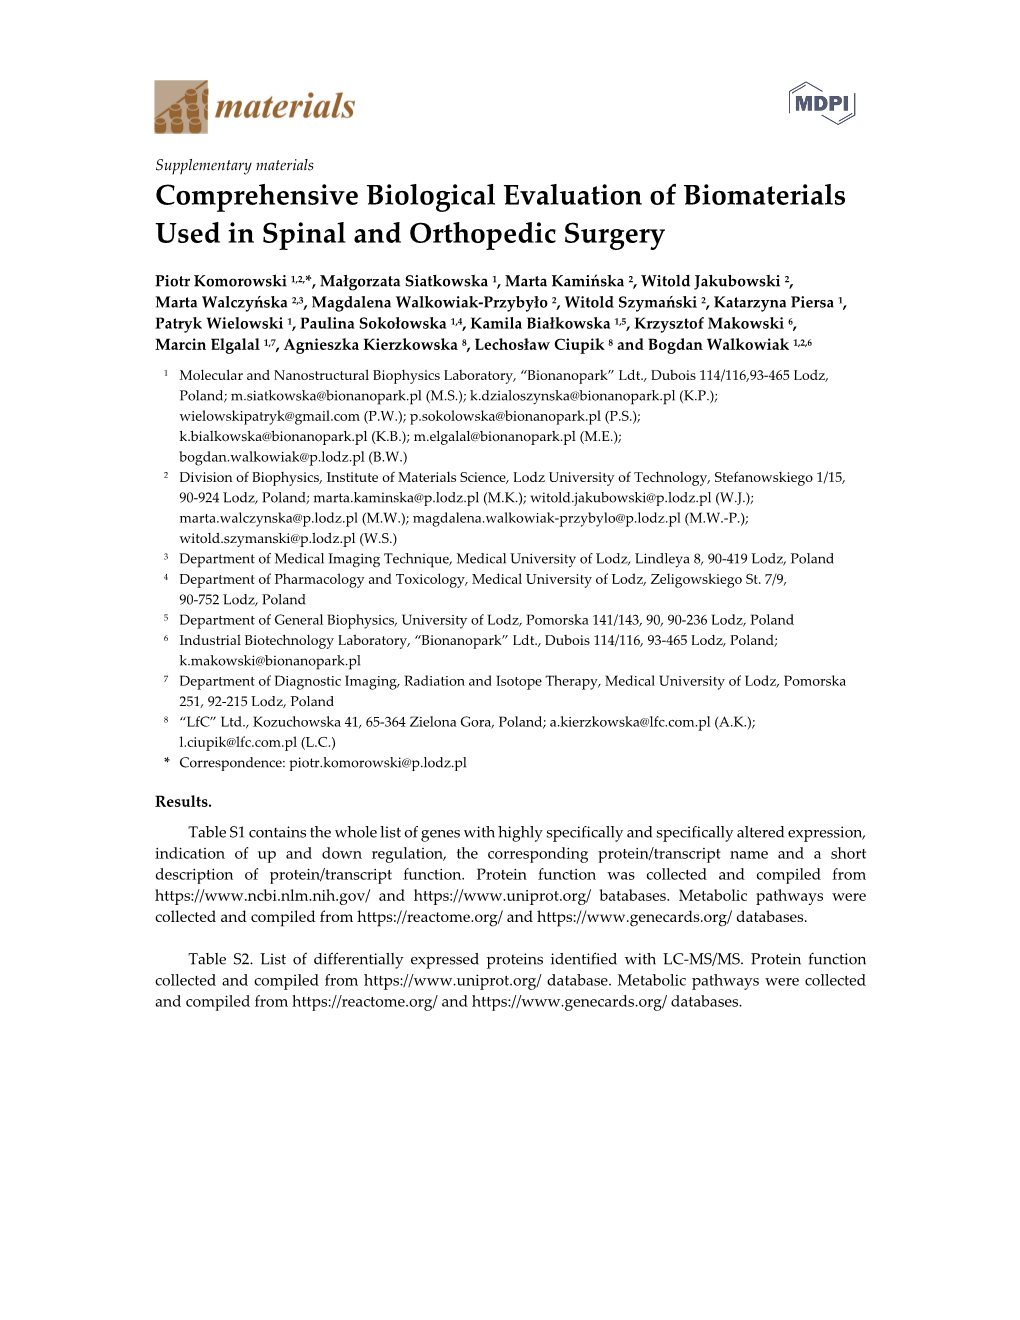 Comprehensive Biological Evaluation of Biomaterials Used in Spinal and Orthopedic Surgery